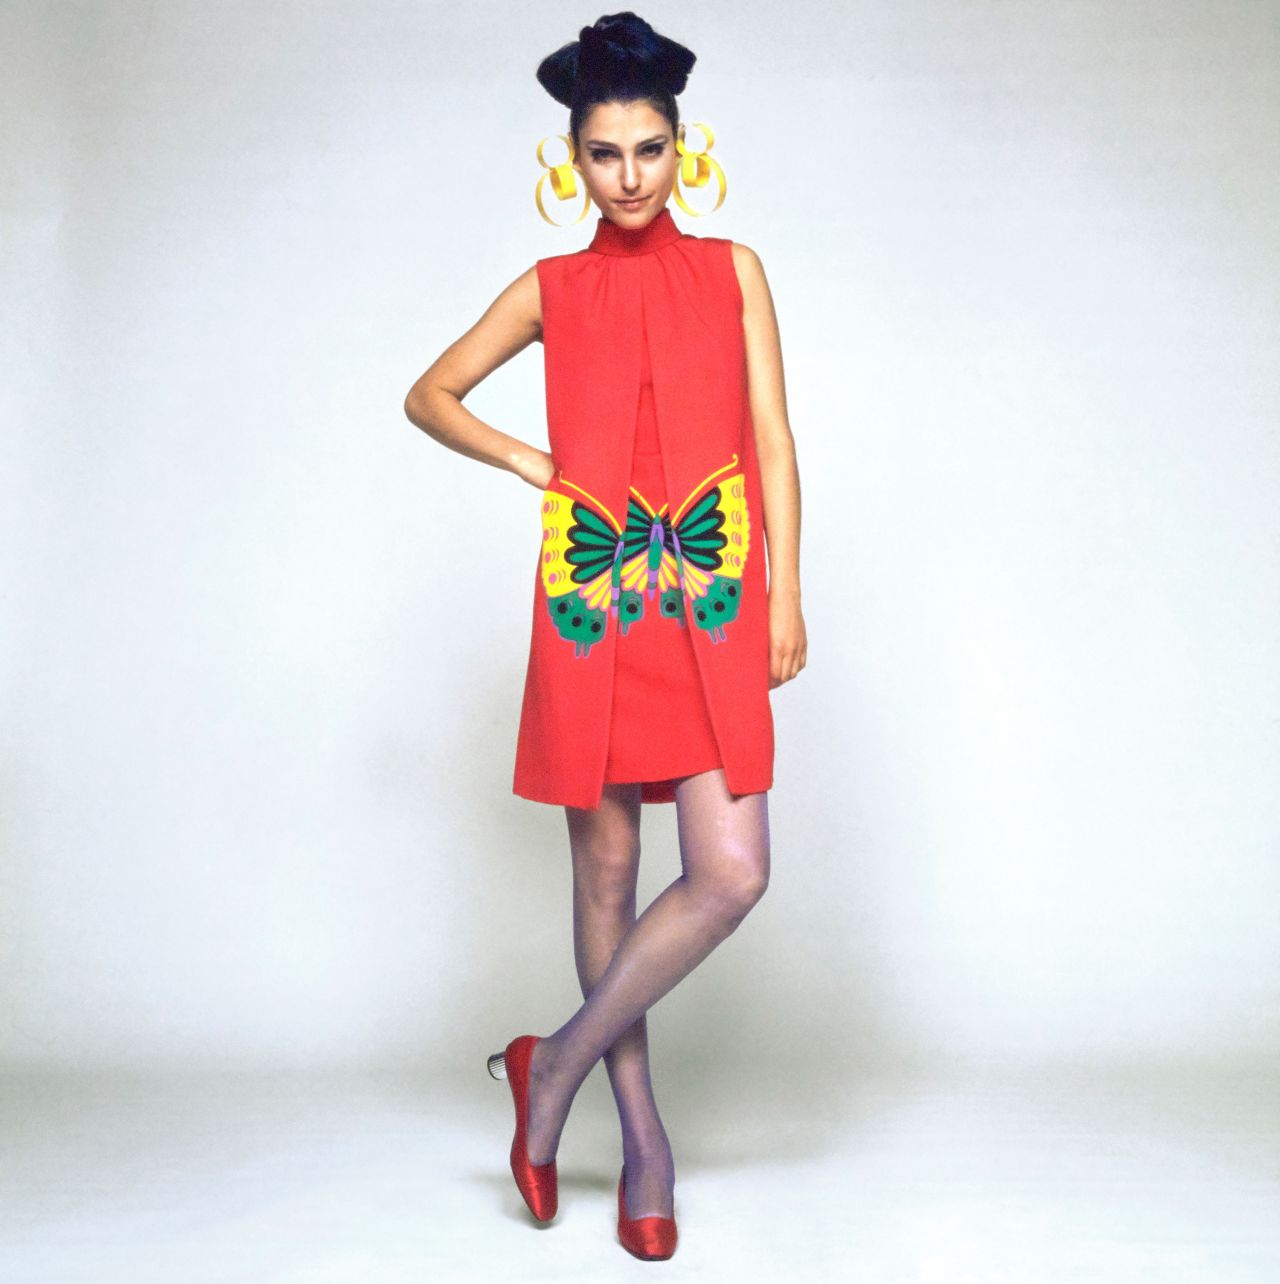 Model Benedetta Barzini wearing a Hanae Mori sleeveless dress printed with a yellow-and-green butterfly, one of the designer's signature motifs.